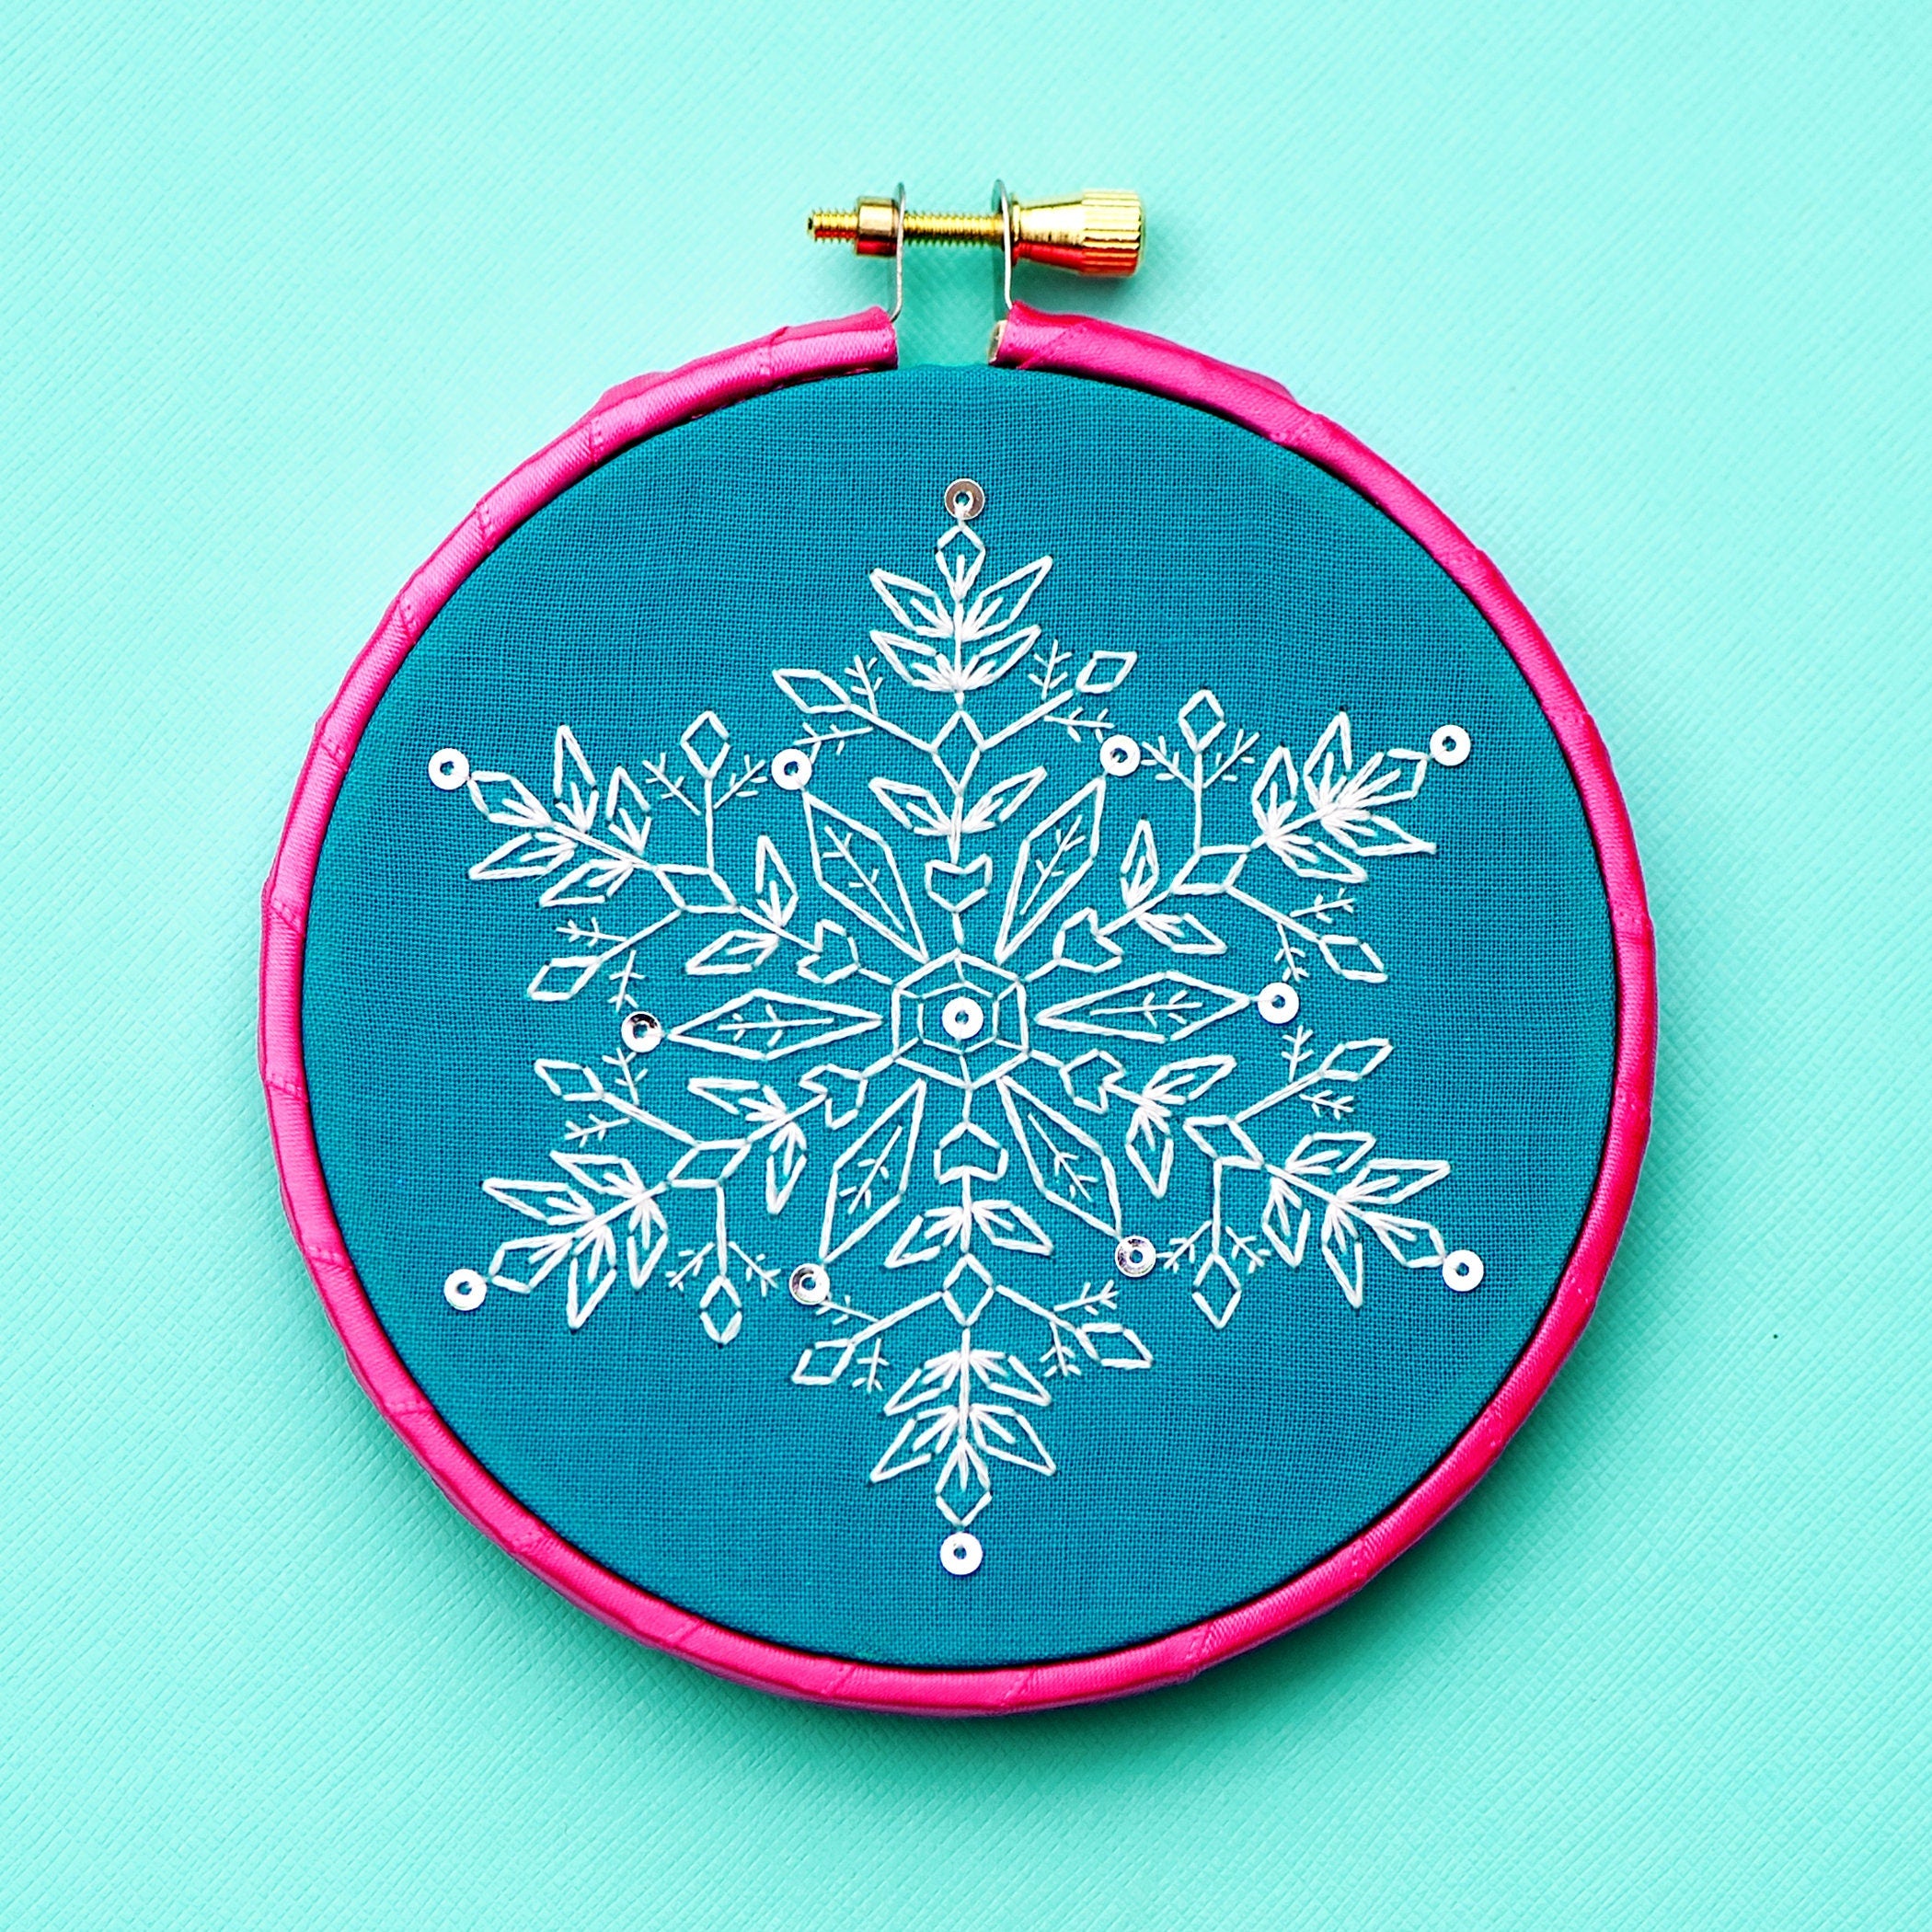 Let It Snow! Snowflake Punch Needle Embroidery Pattern